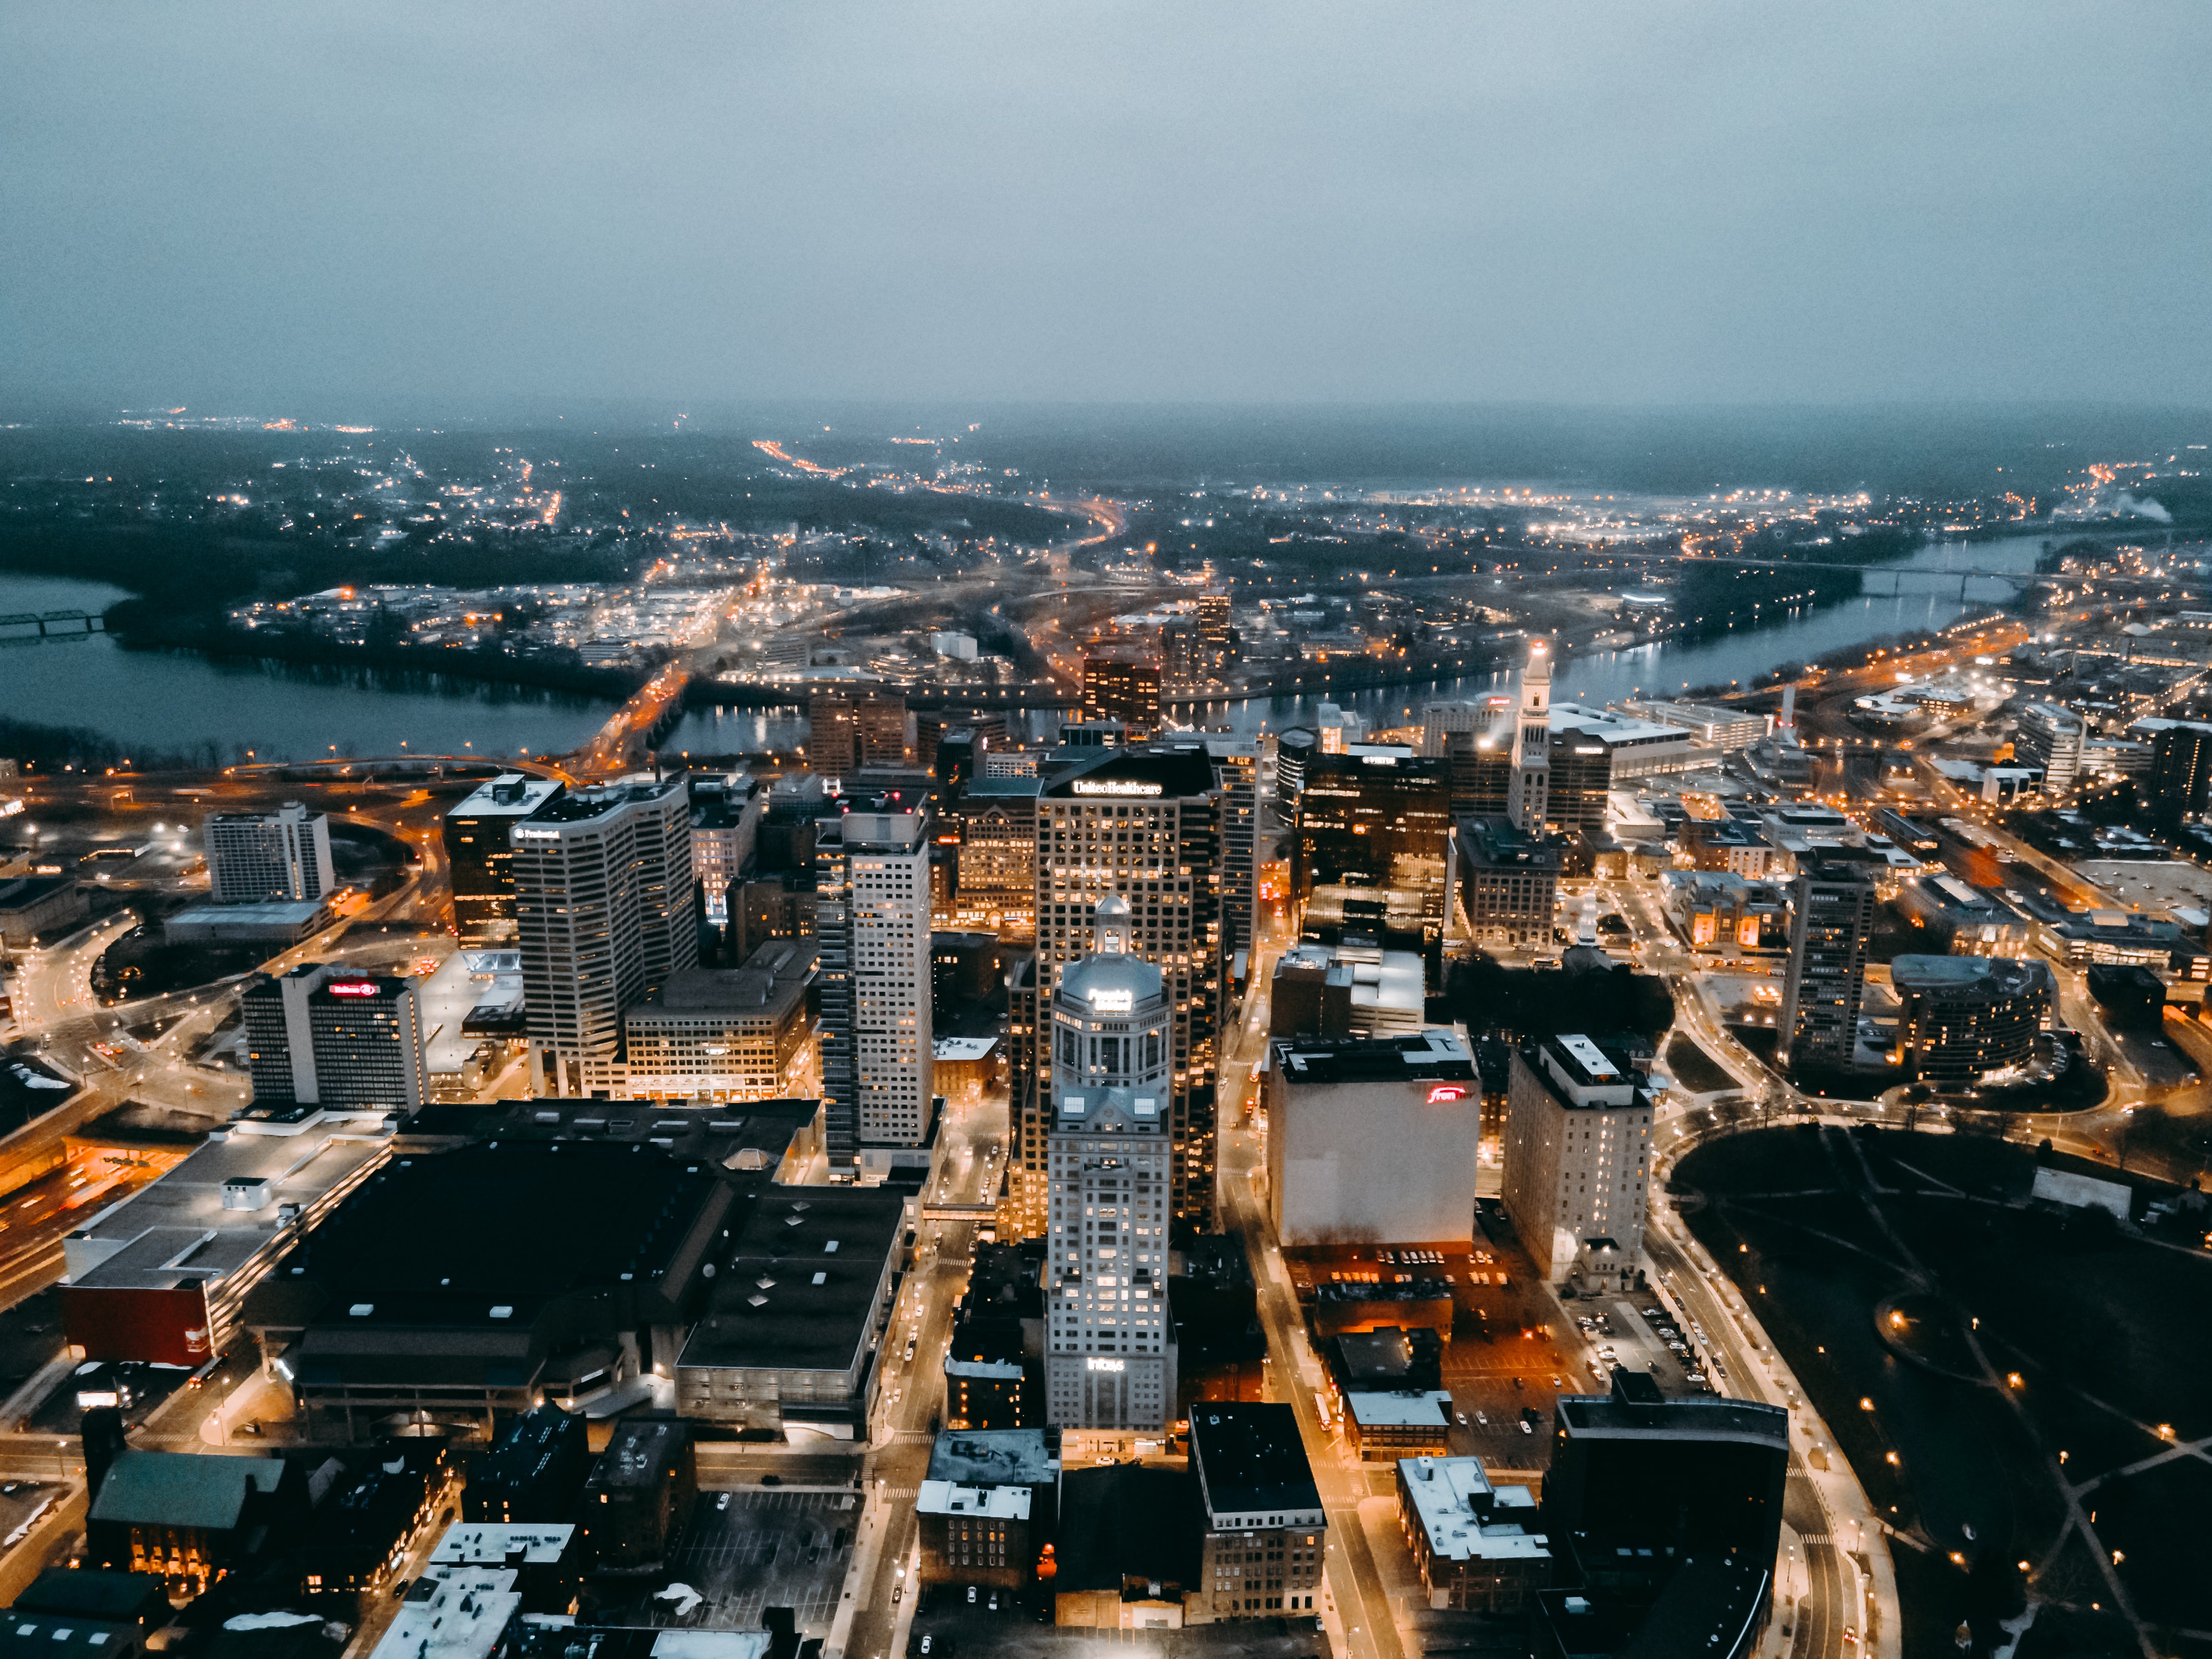 rivers, cities, city, building, lights, view from above, horizon 32K